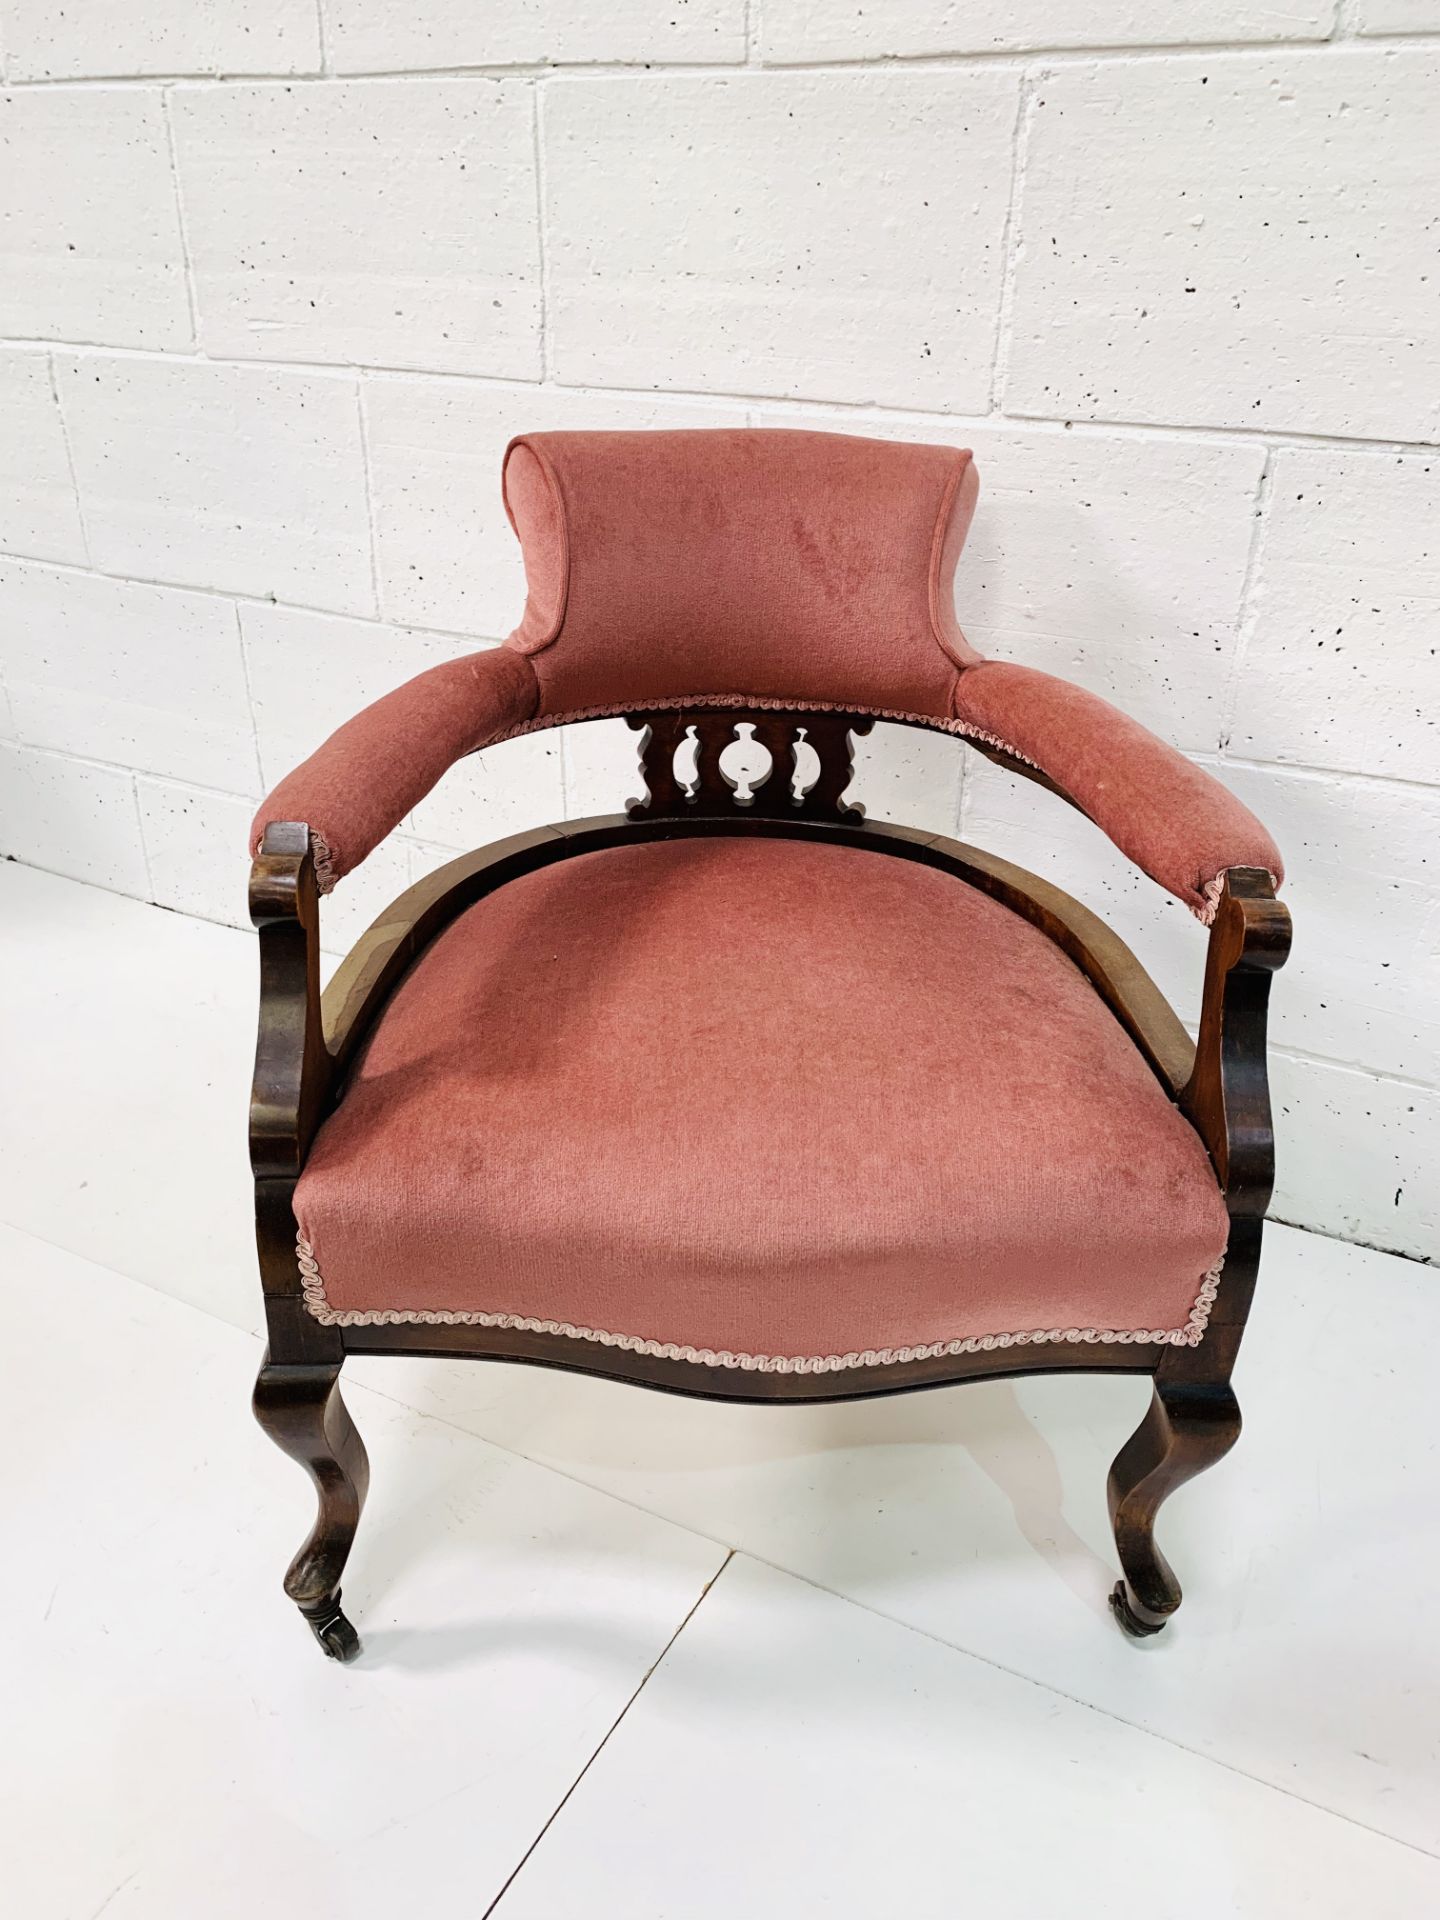 Mahogany pink velvet upholstered open arm chair with shaped legs. - Image 2 of 4